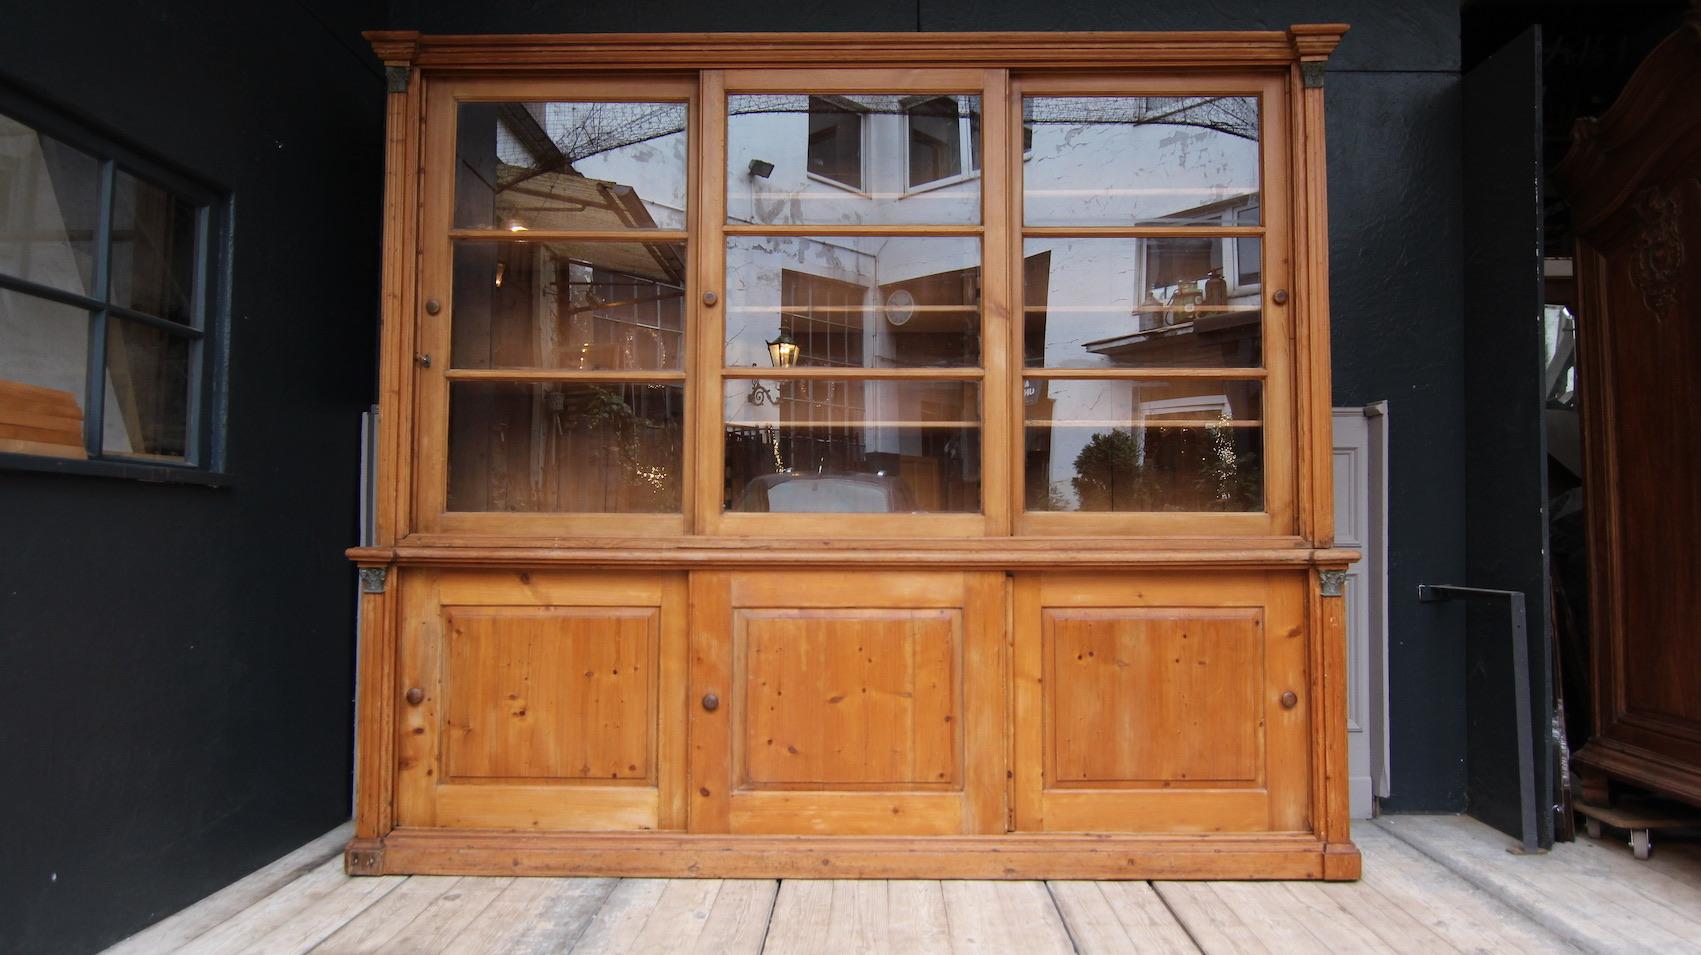 Large English shop display cabinet, made of solid pine and waxed, circa 1880.
Consisting of a lower part with 3 sliding doors and an upper part with 3 glazed sliding doors behind which there are a total of 8 adjustable shelves. Corinthian capitals